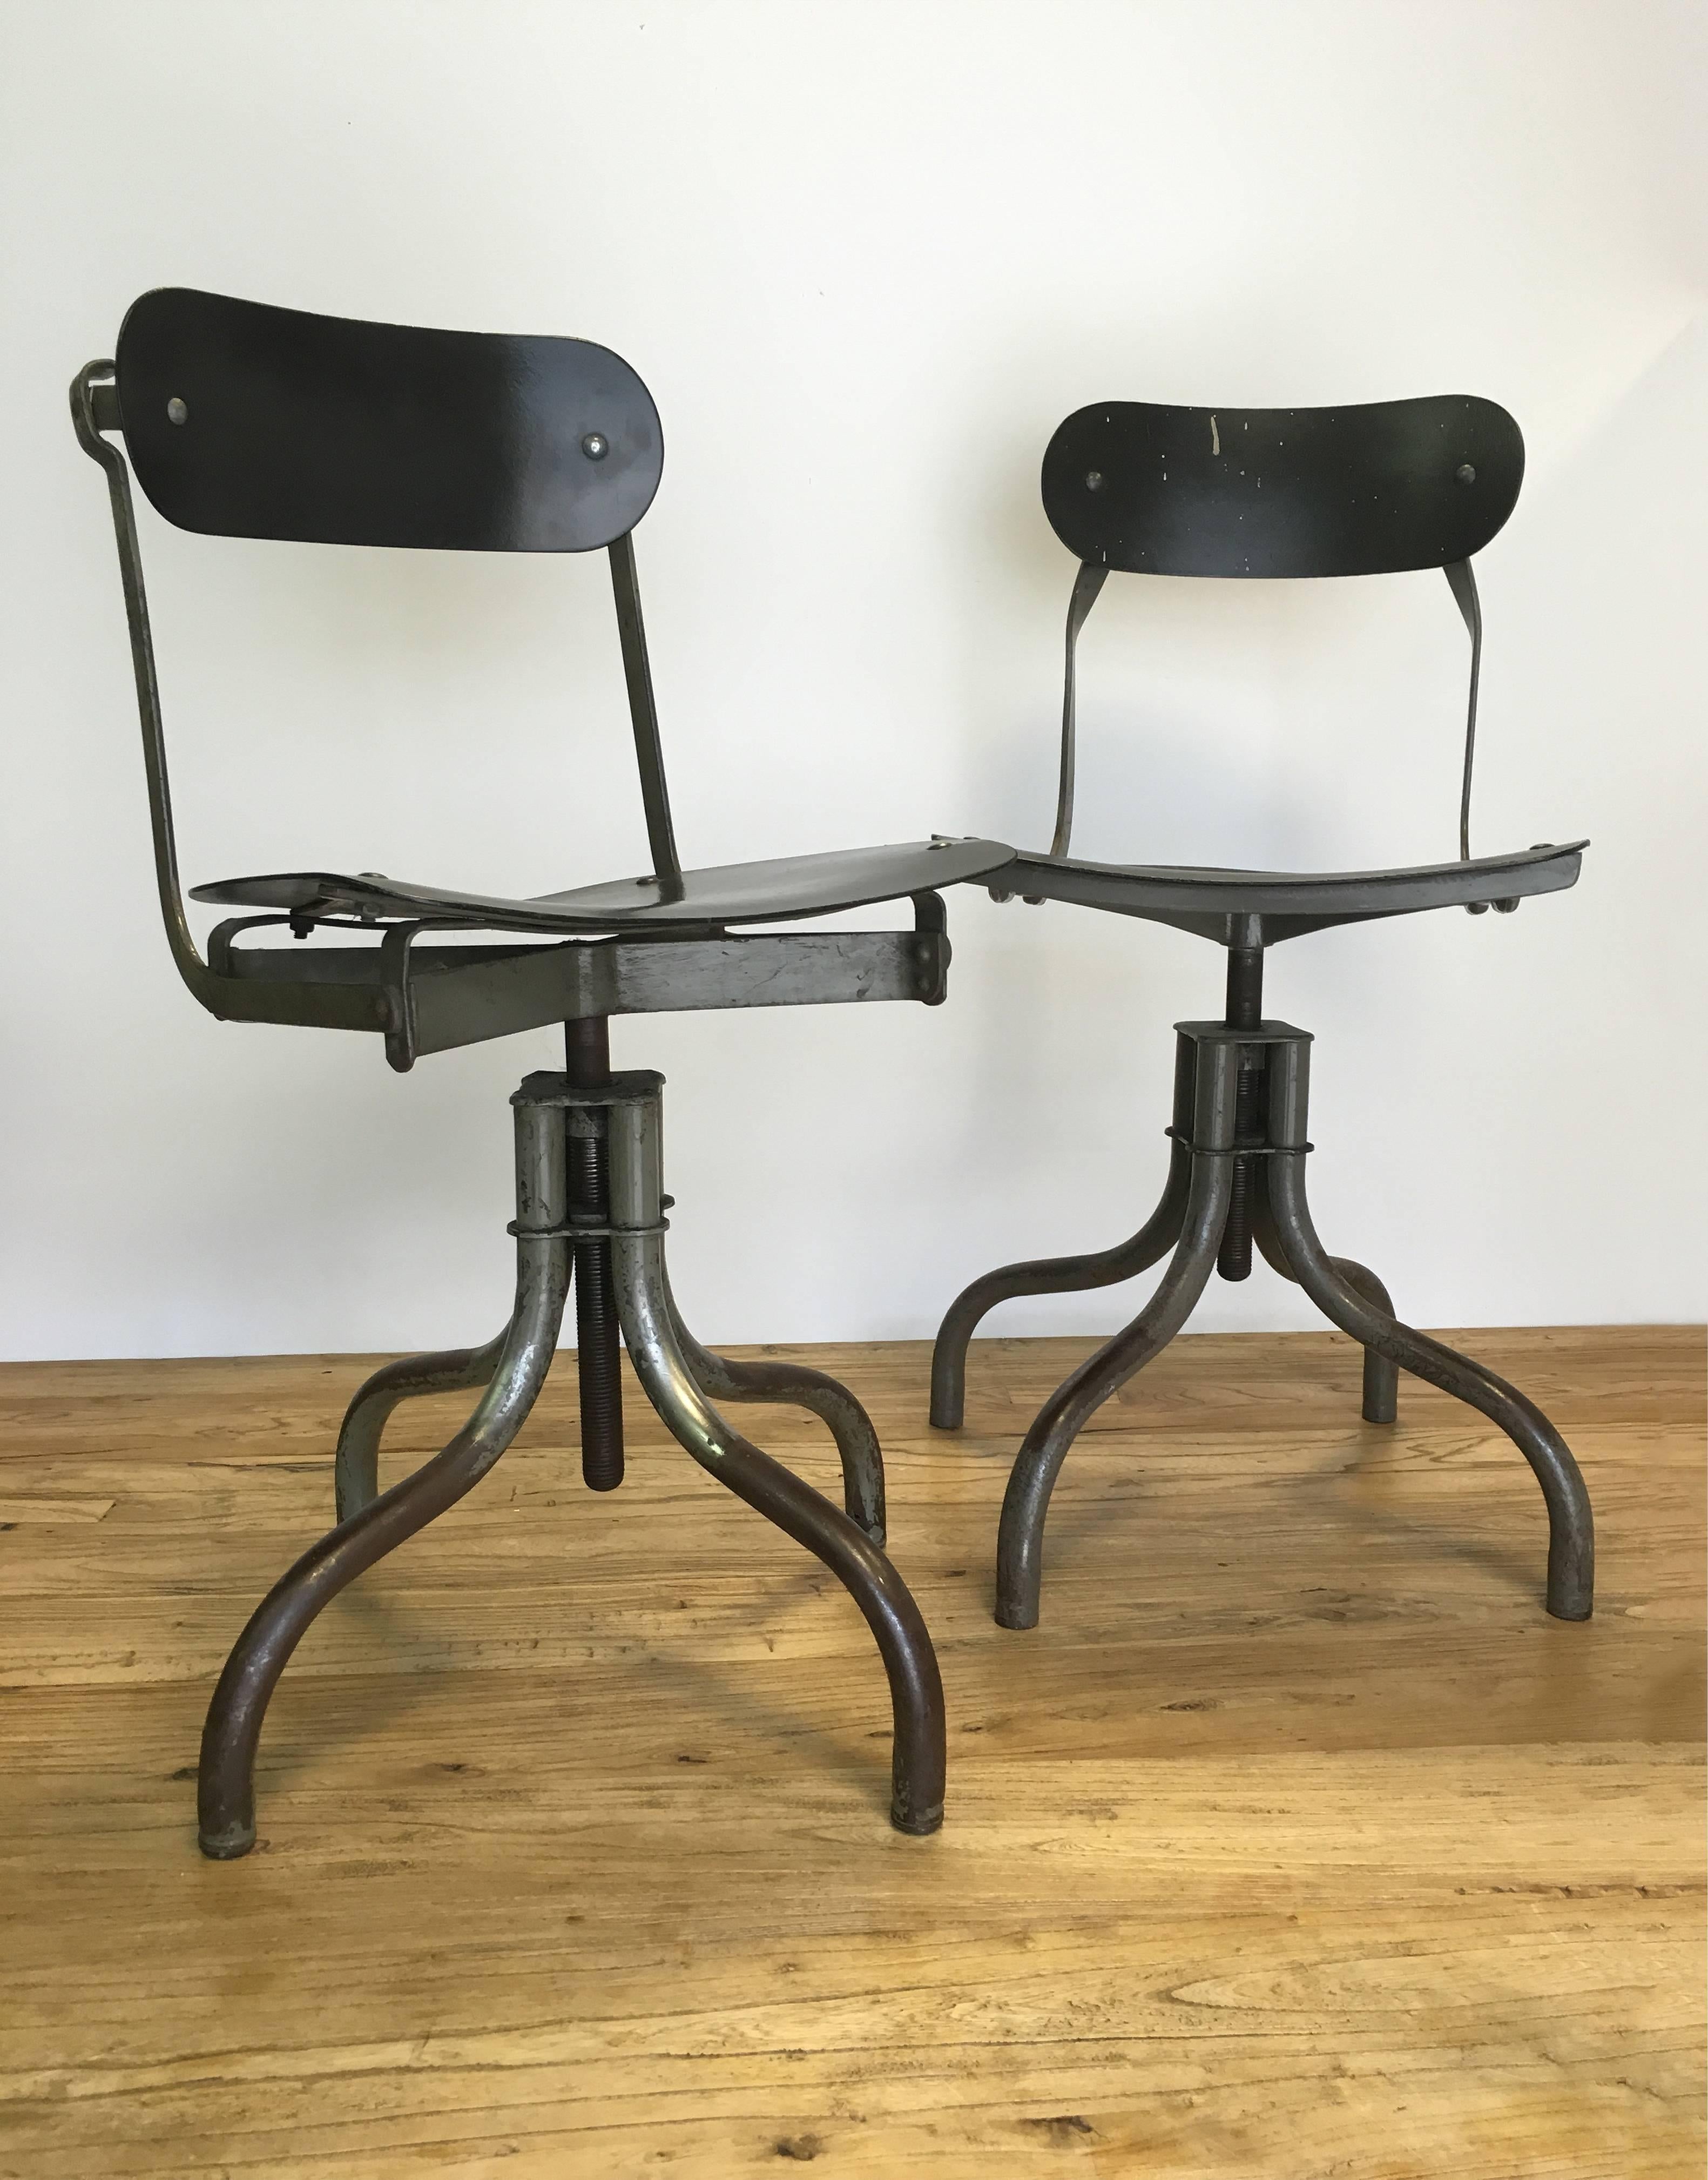 Original Tan-Sad Posture Chair. Produced in 1920's England as one of the first ergonomic work chairs. Adjustable seat height.

Priced for set of four. Eight chairs currently available; please inquire regarding acquiring all eight.